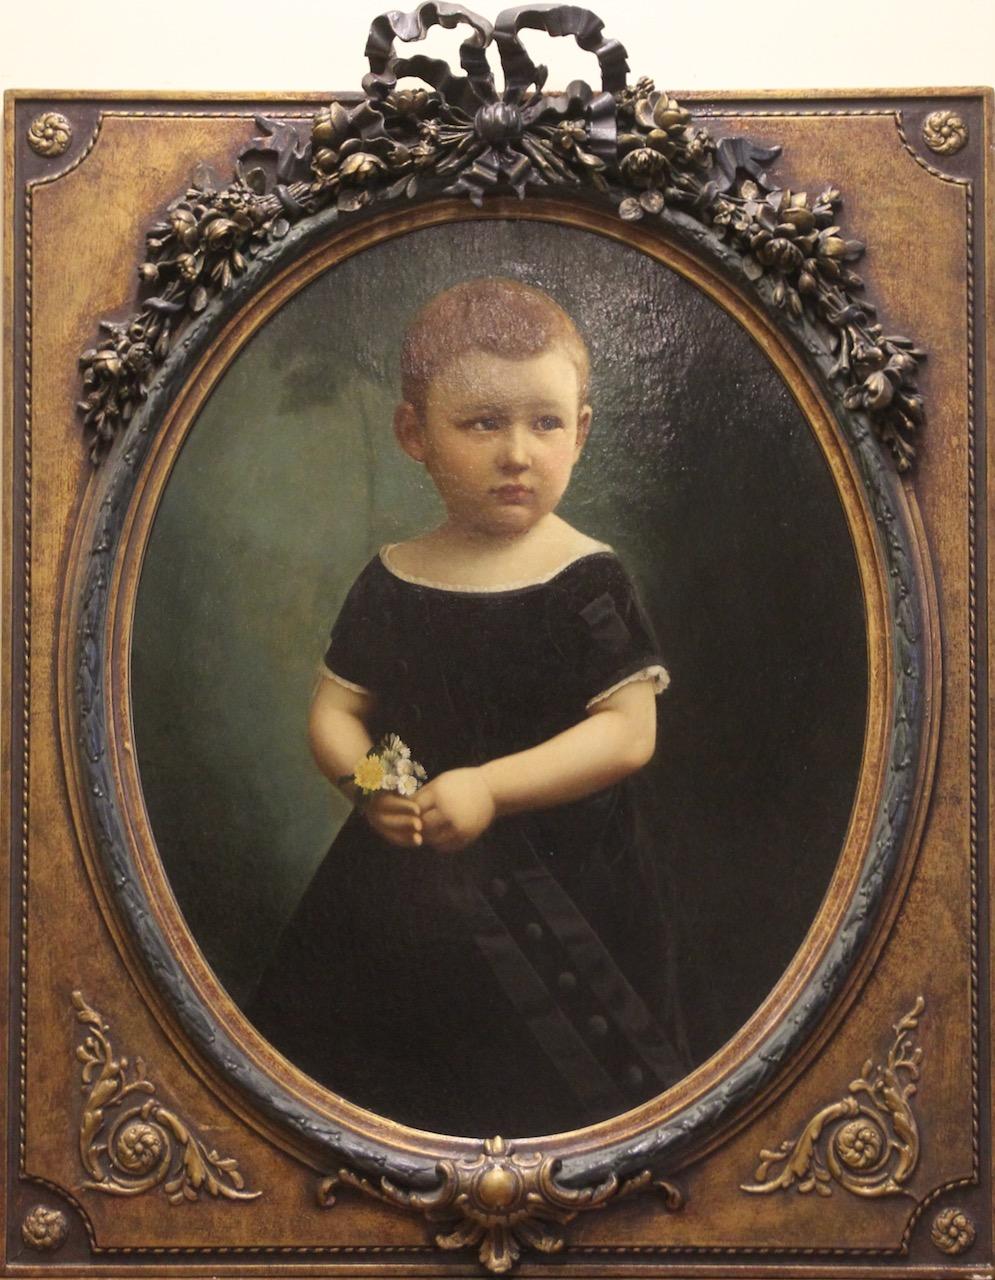 Unknown Portrait Painting - Antique Oil Painting. Child Portrait with Ornate Frame.